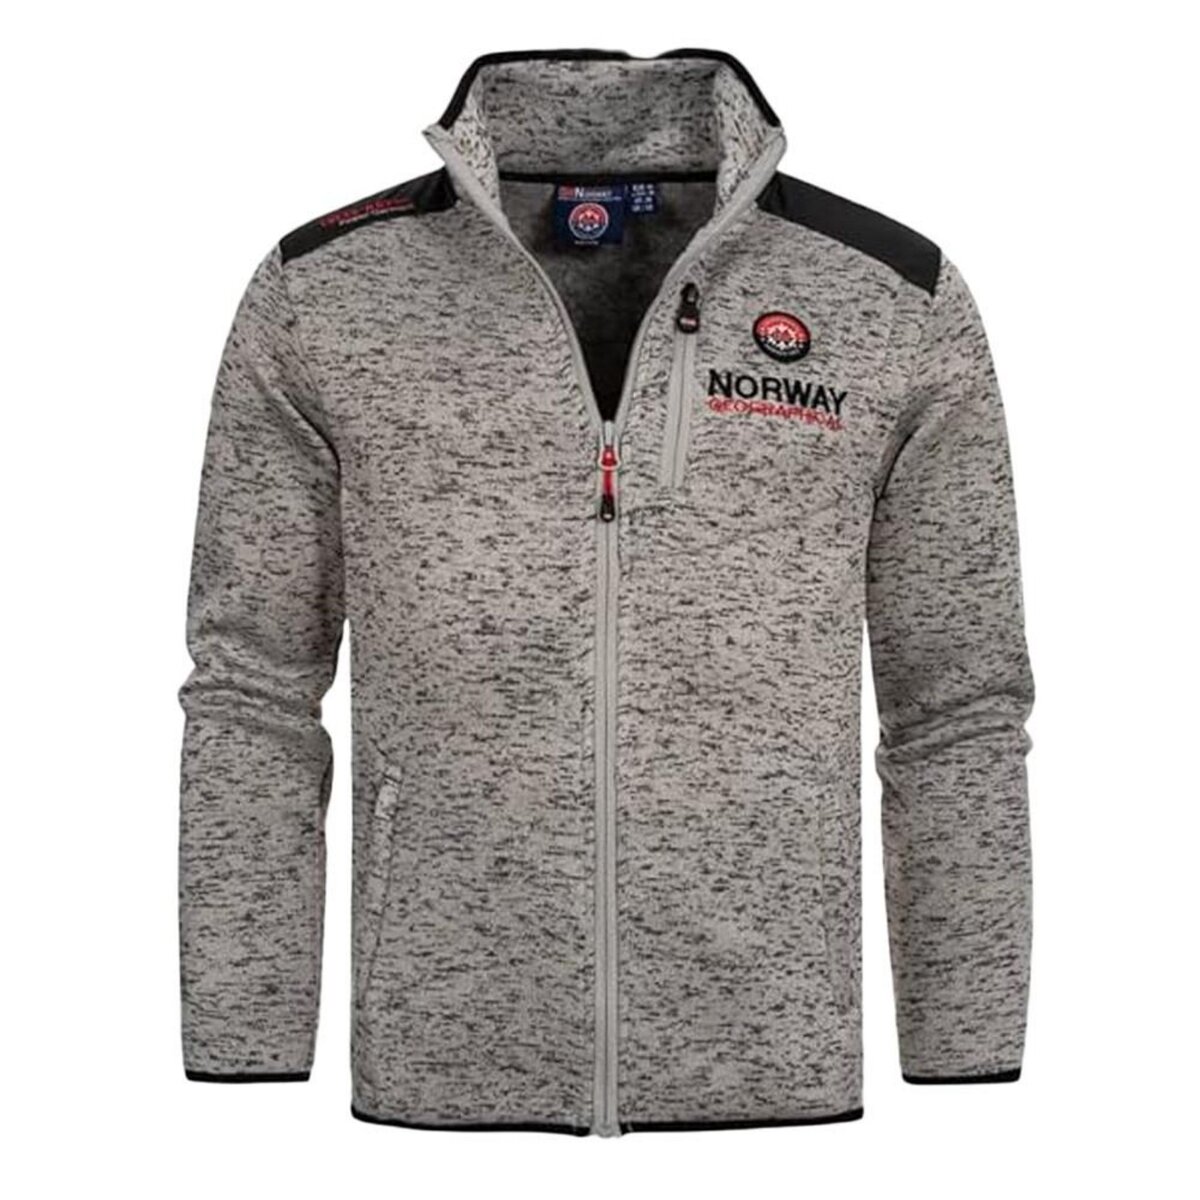 Geographical norway gris